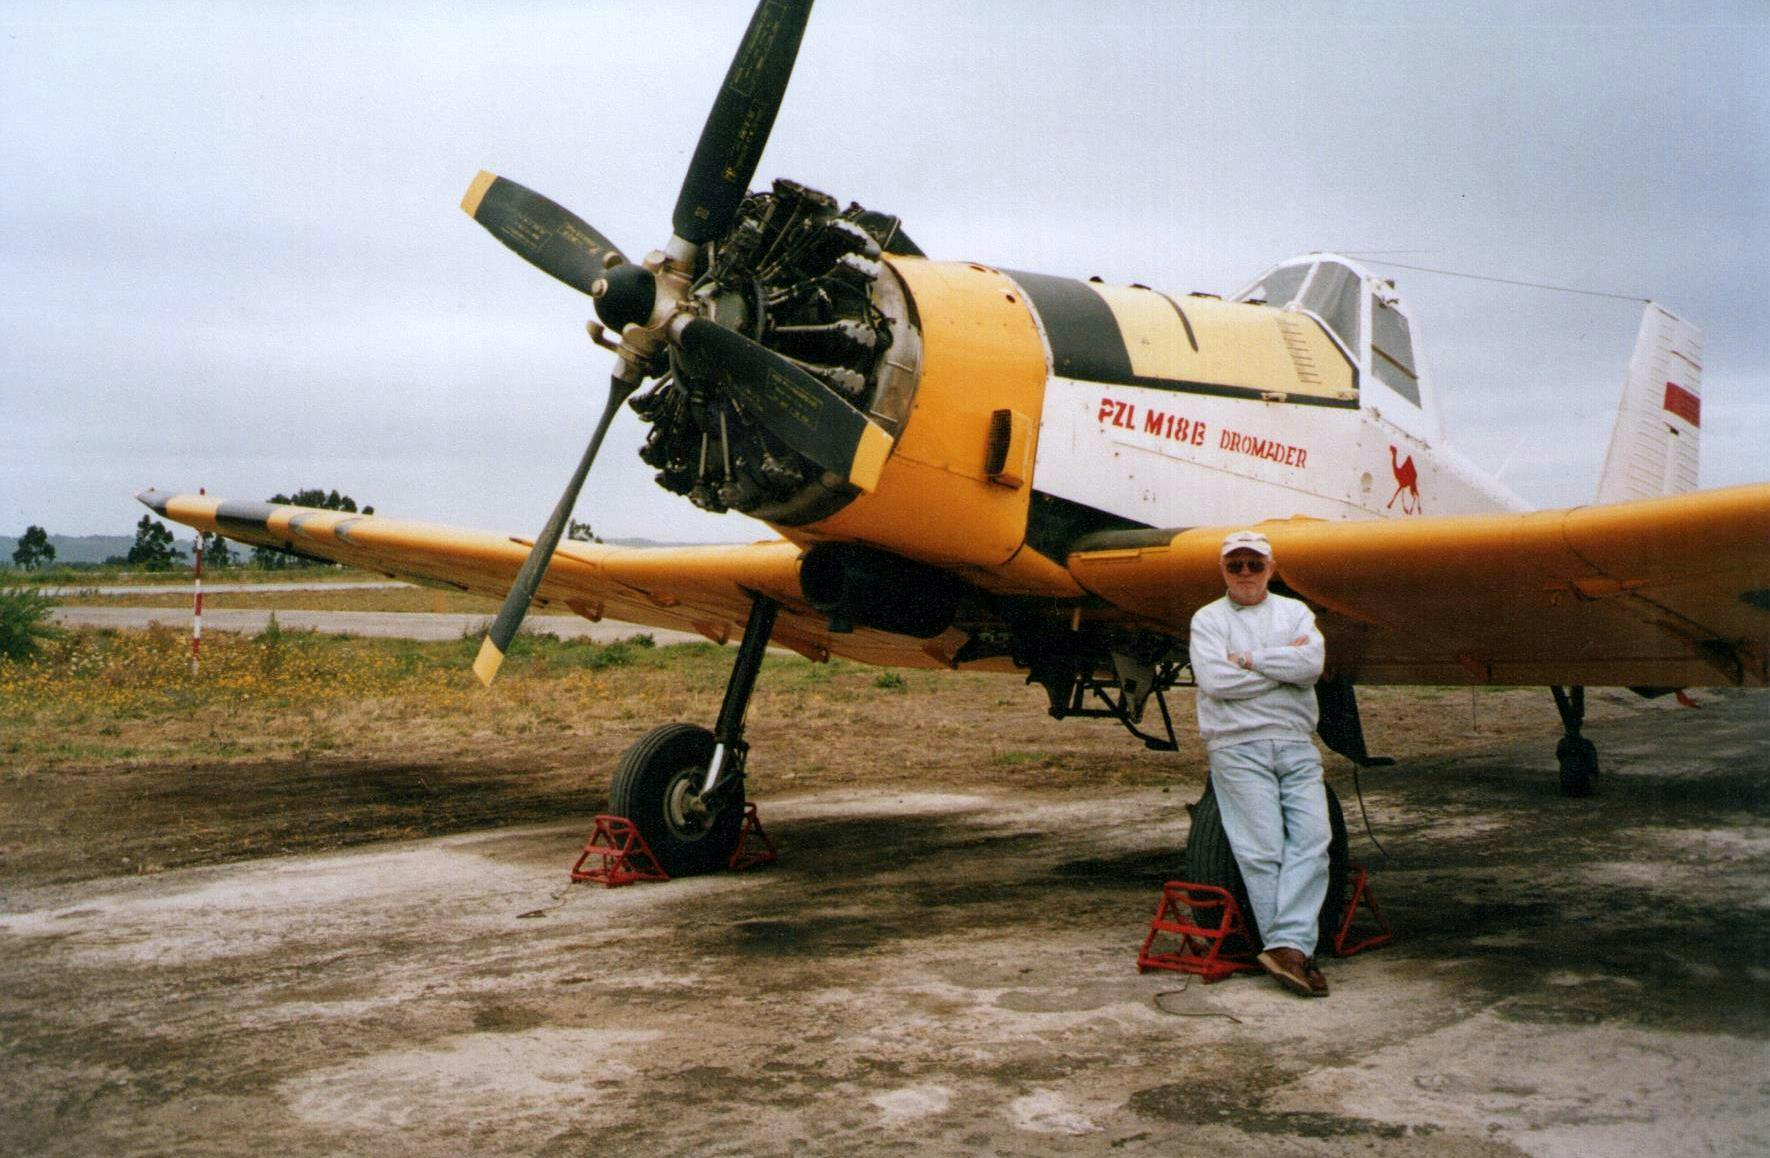 Chile, Concepcion Airport, early 21st century. Zbigniew Kowalski leans on a PZL M18 Dromader plane.